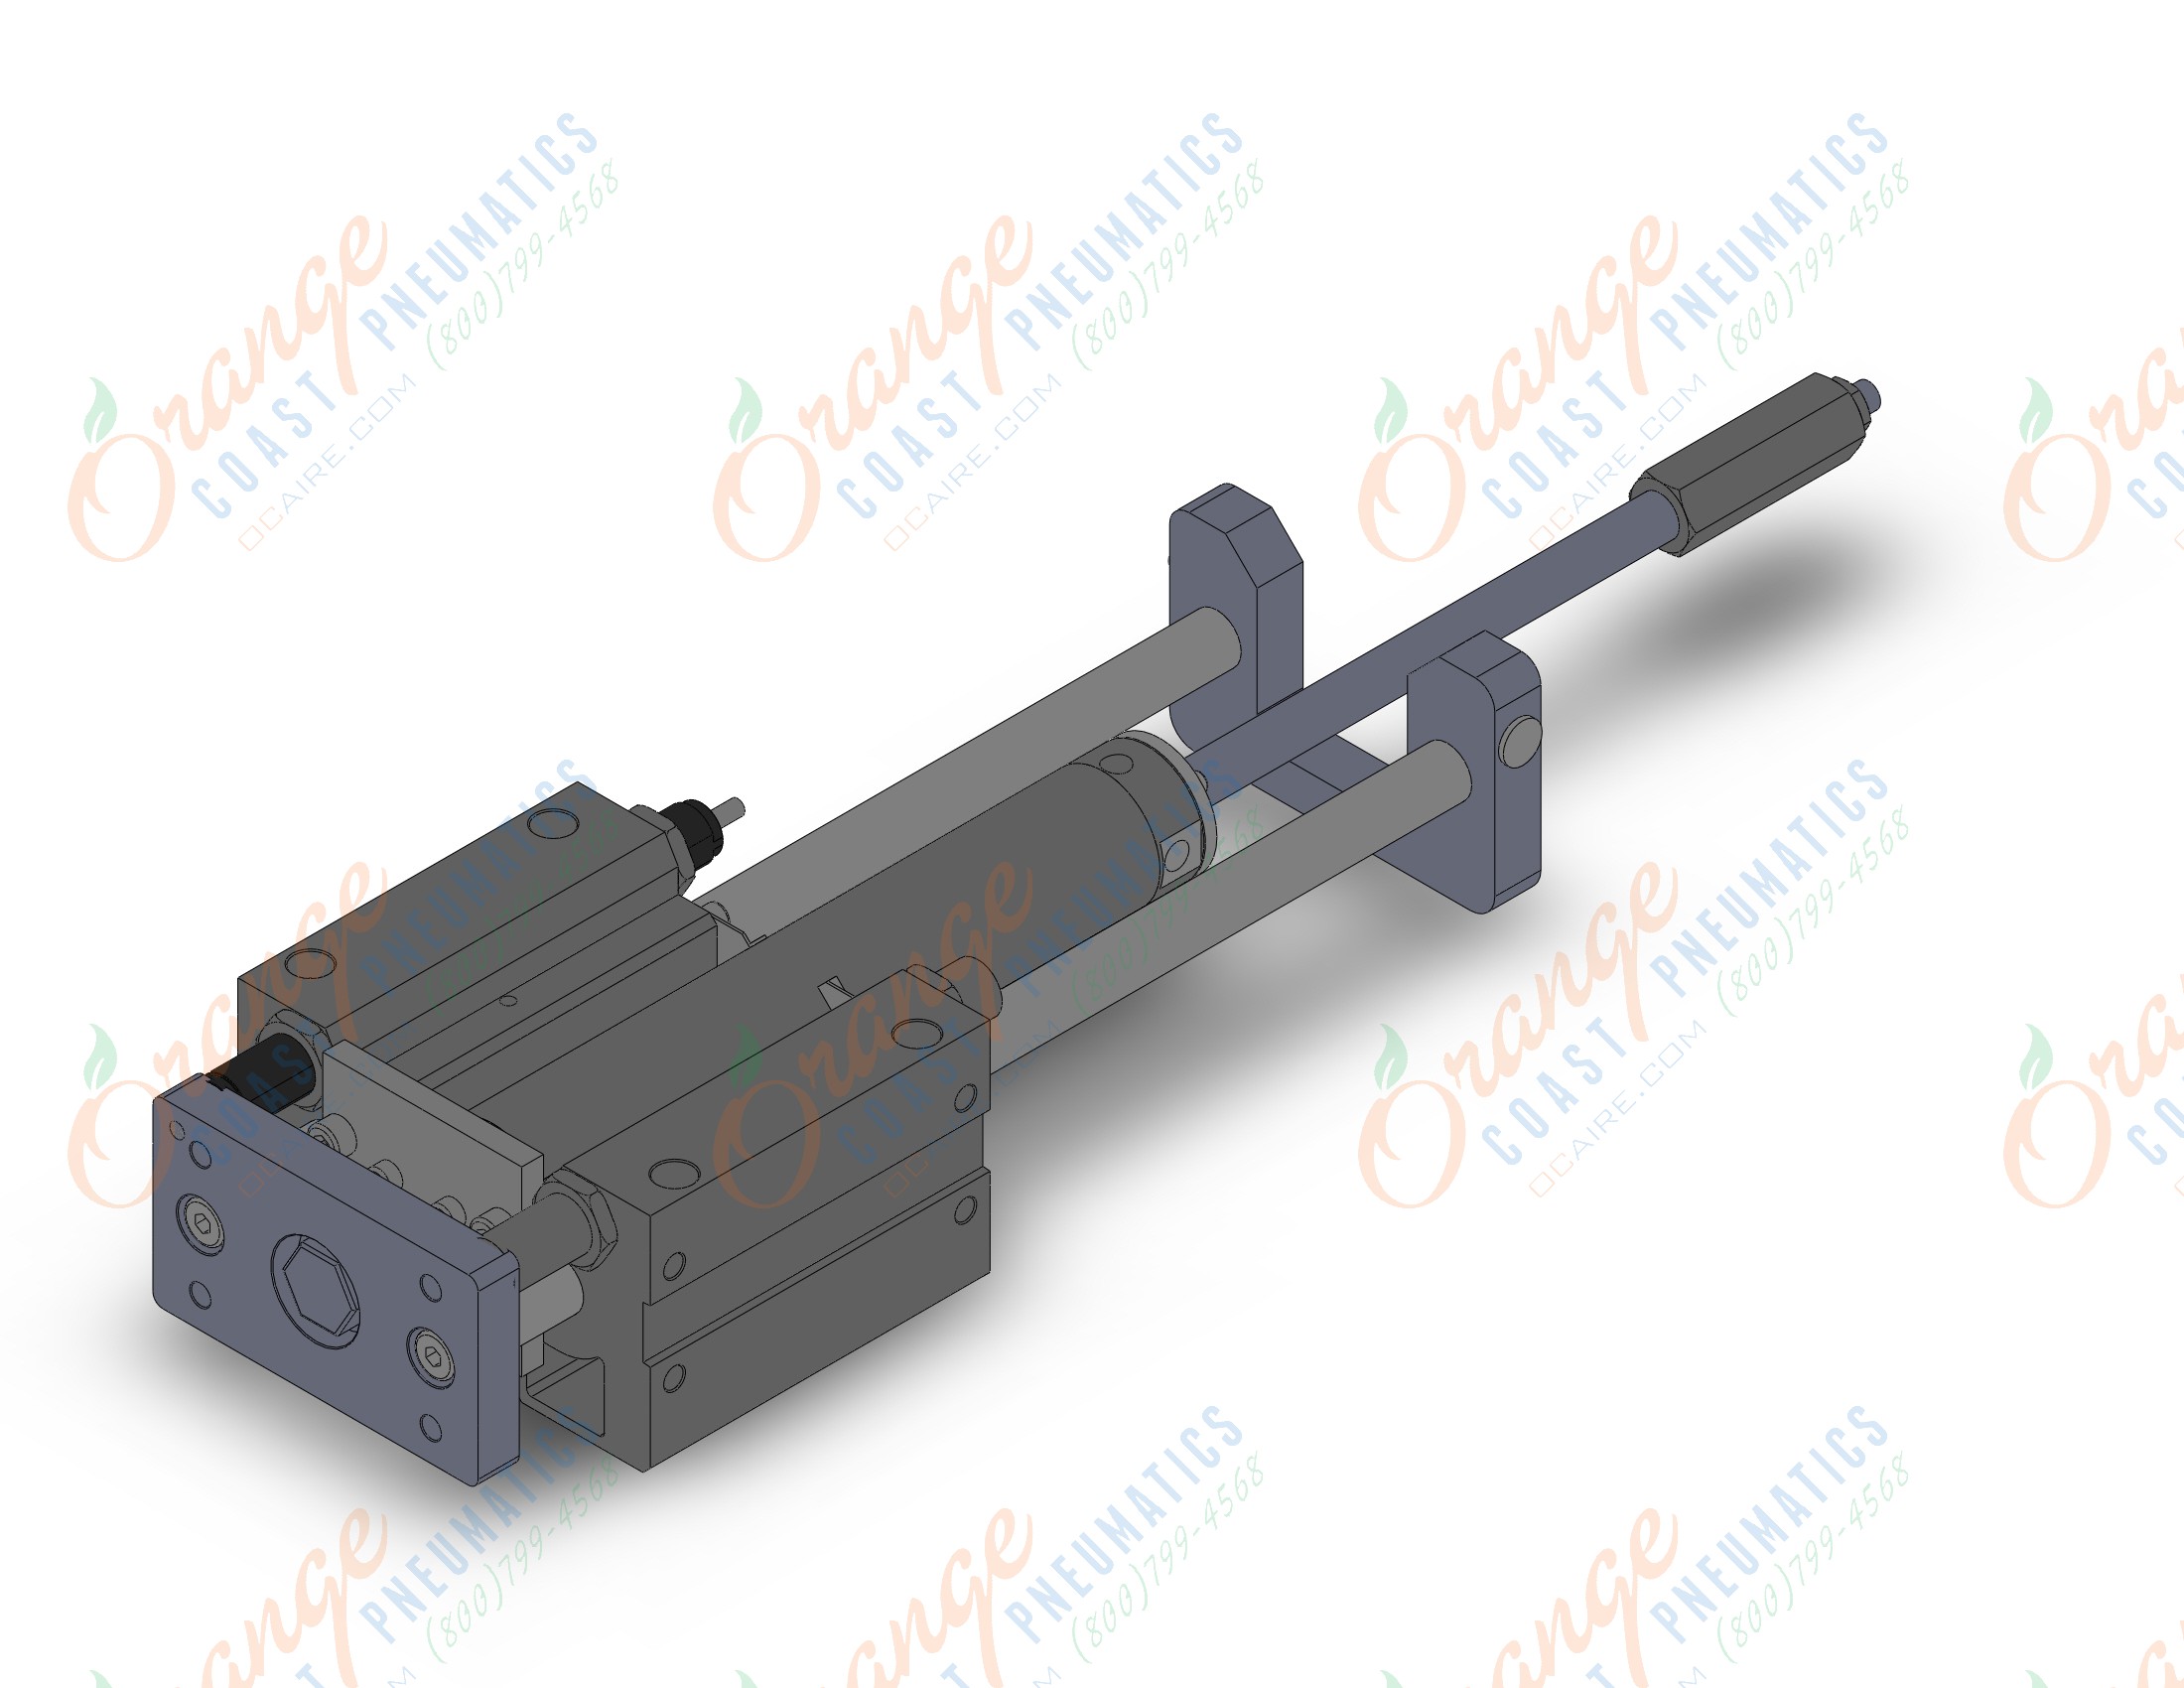 SMC MGGLB40-200B-XC8 mgg, guide cylinder, GUIDED CYLINDER